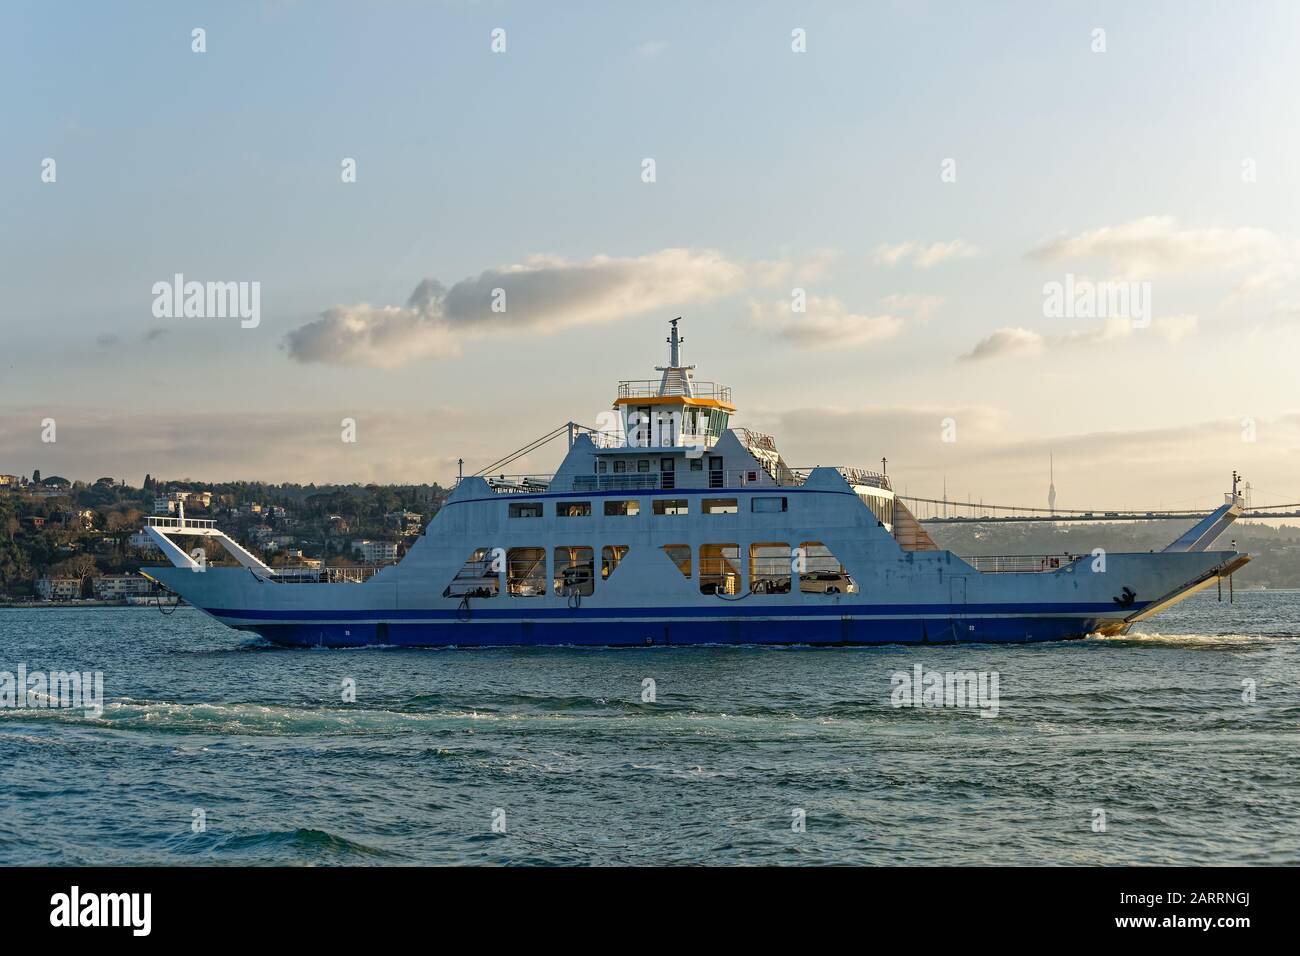 Ferryboat loaded with cars sails through Bosphorus Strait between Marmara and Black Sea in Istanbul / Turkey. Stock Photo